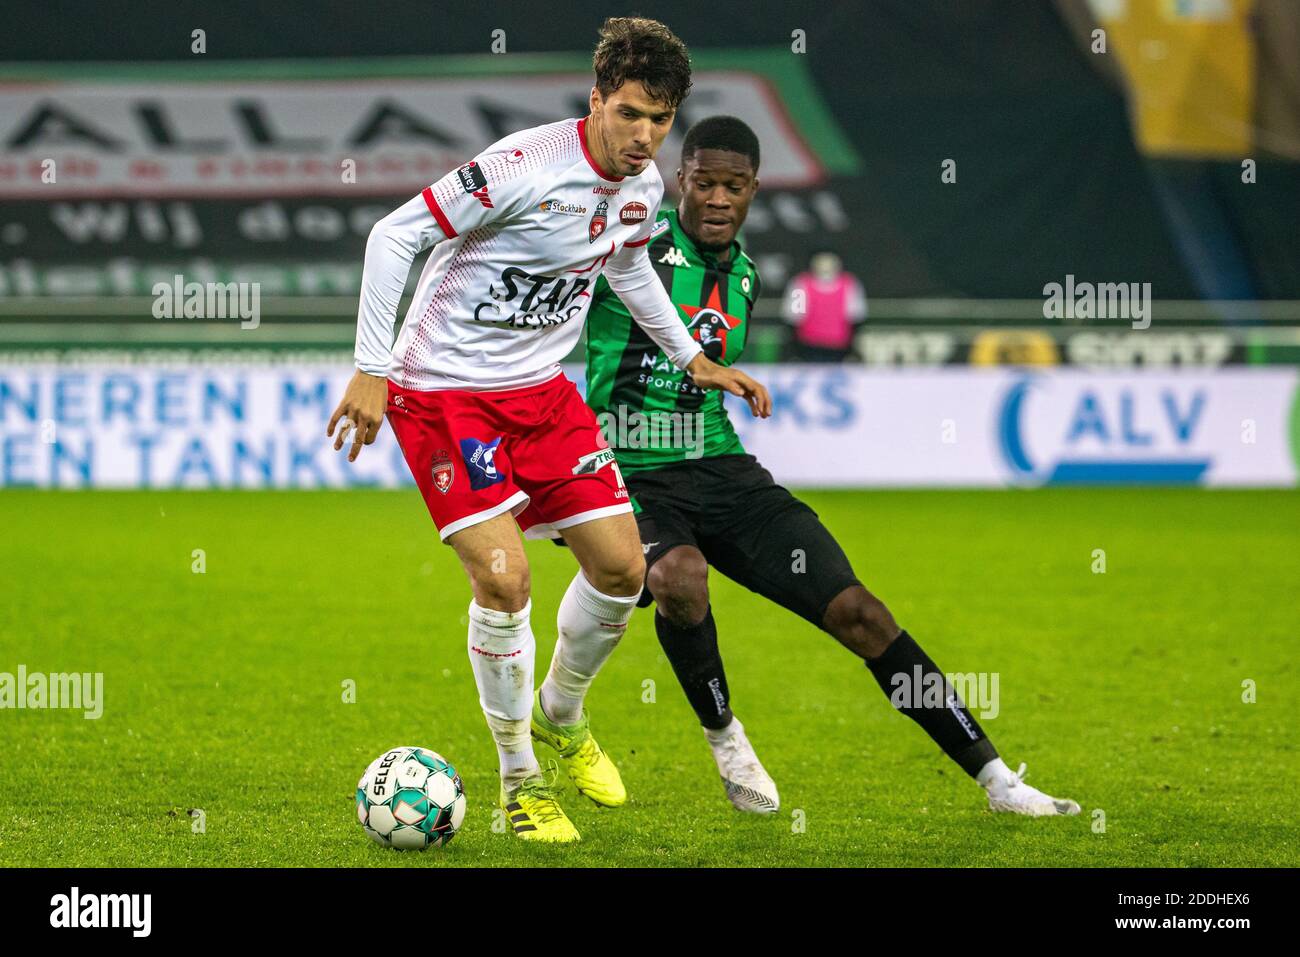 Cercle's Ike Ugbo and Mouscron's Marko Bakic fight for the ball during a postponed soccer match between Cercle Brugge KSV and RE Mouscron, Wednesday 2 Stock Photo